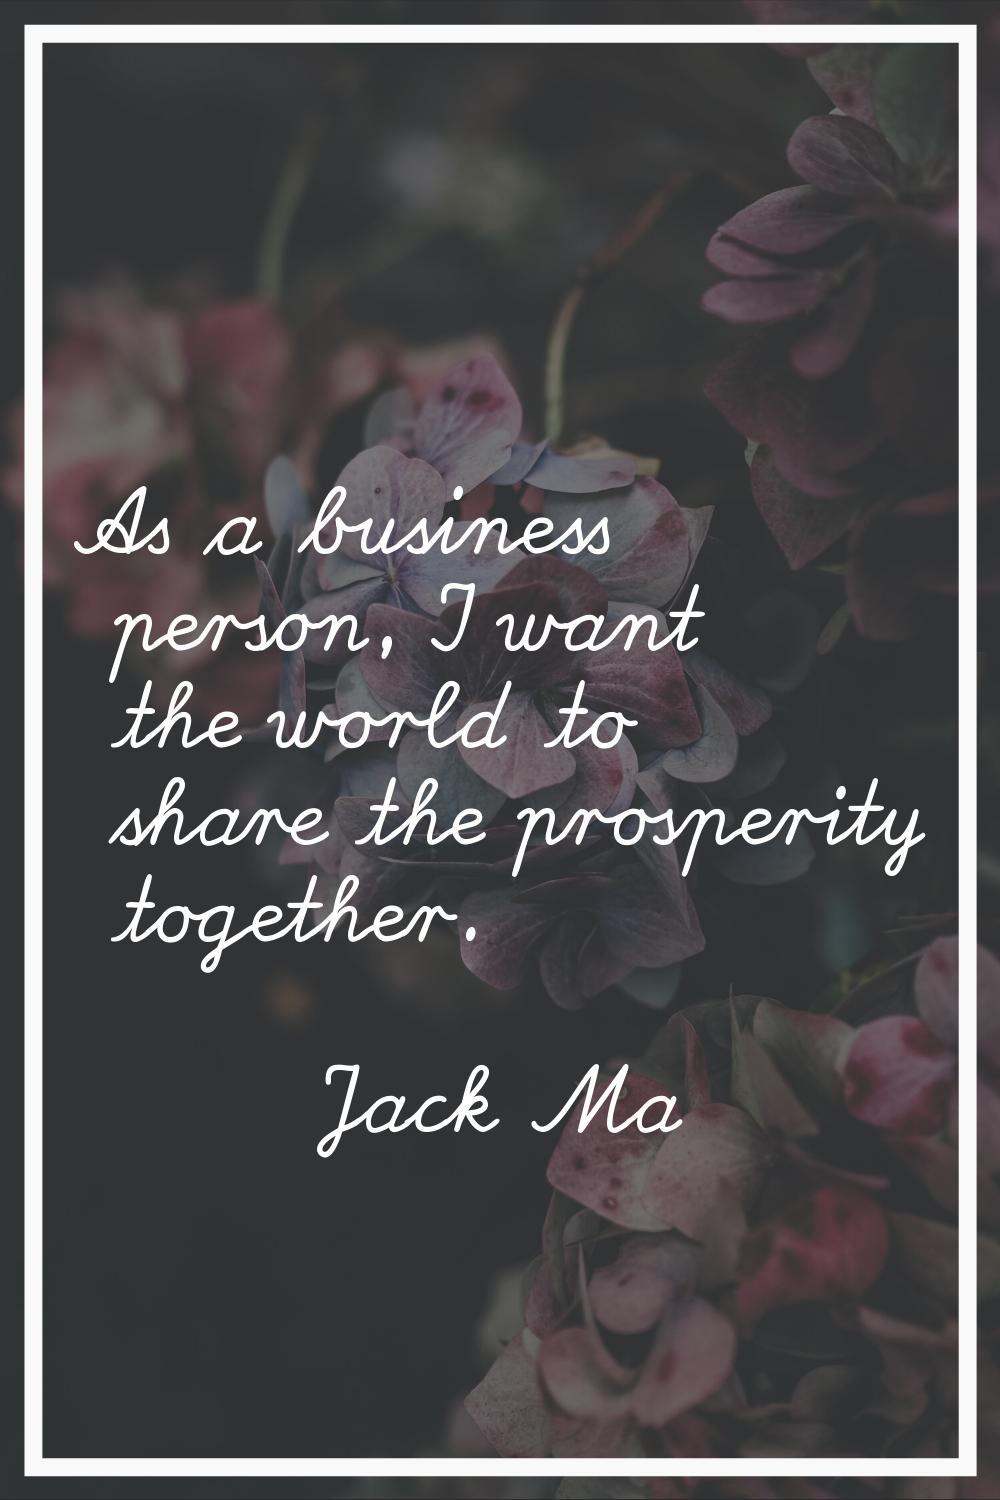 As a business person, I want the world to share the prosperity together.